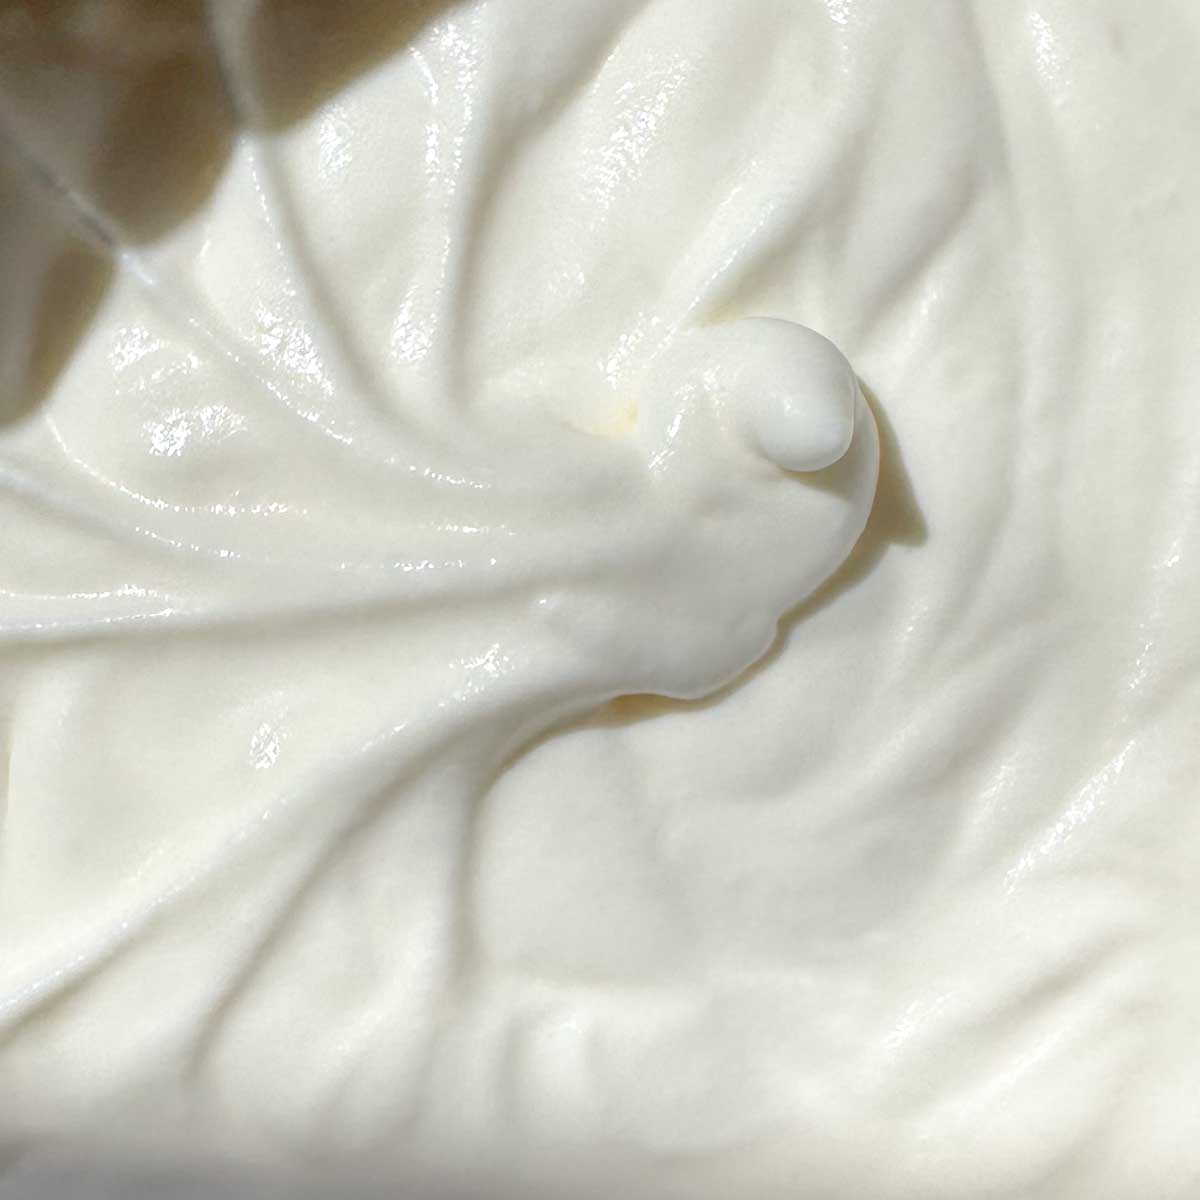 Whipped cream whipped to soft peaks